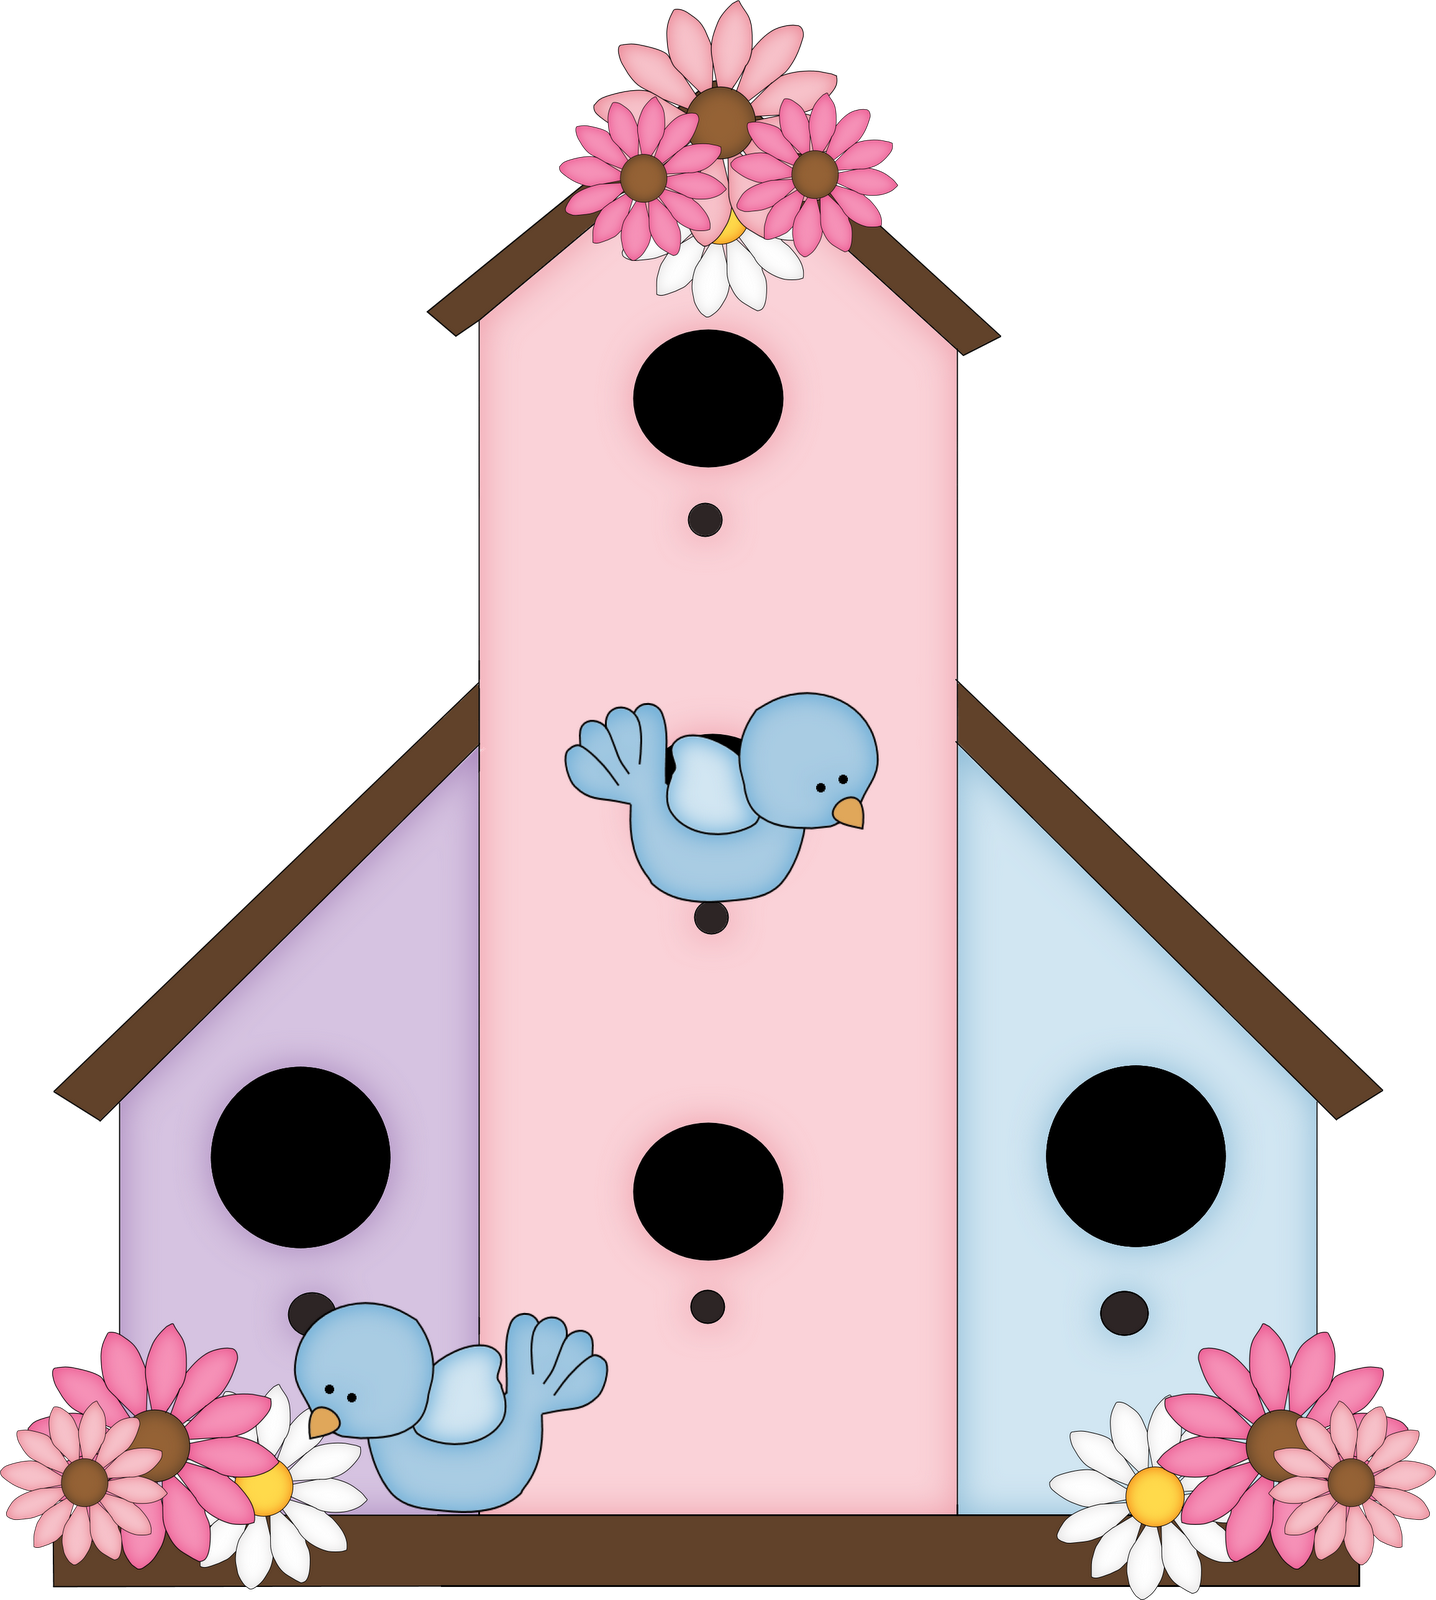 Free Birdhouse Pictures, Download Free Clip Art, Free Clip